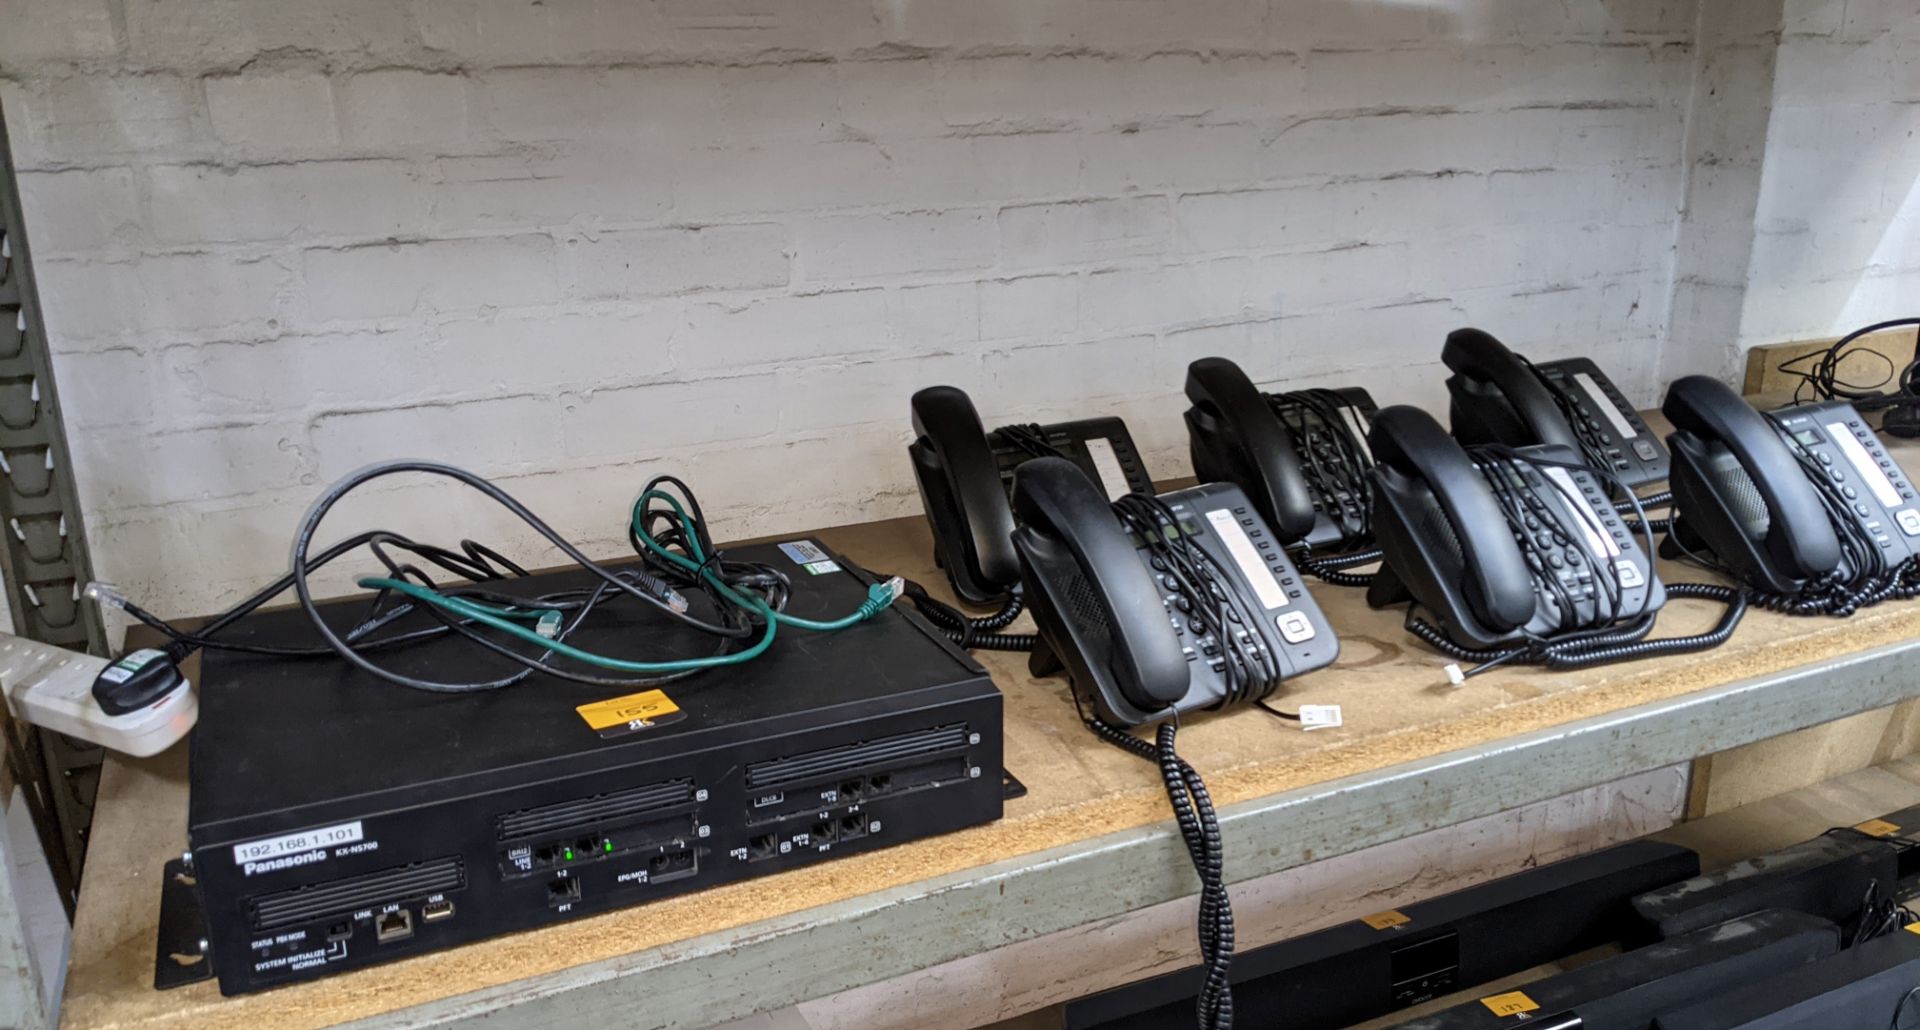 Panasonic phone system comprising KX-NS700 phone system plus 6 handsets - Image 2 of 12